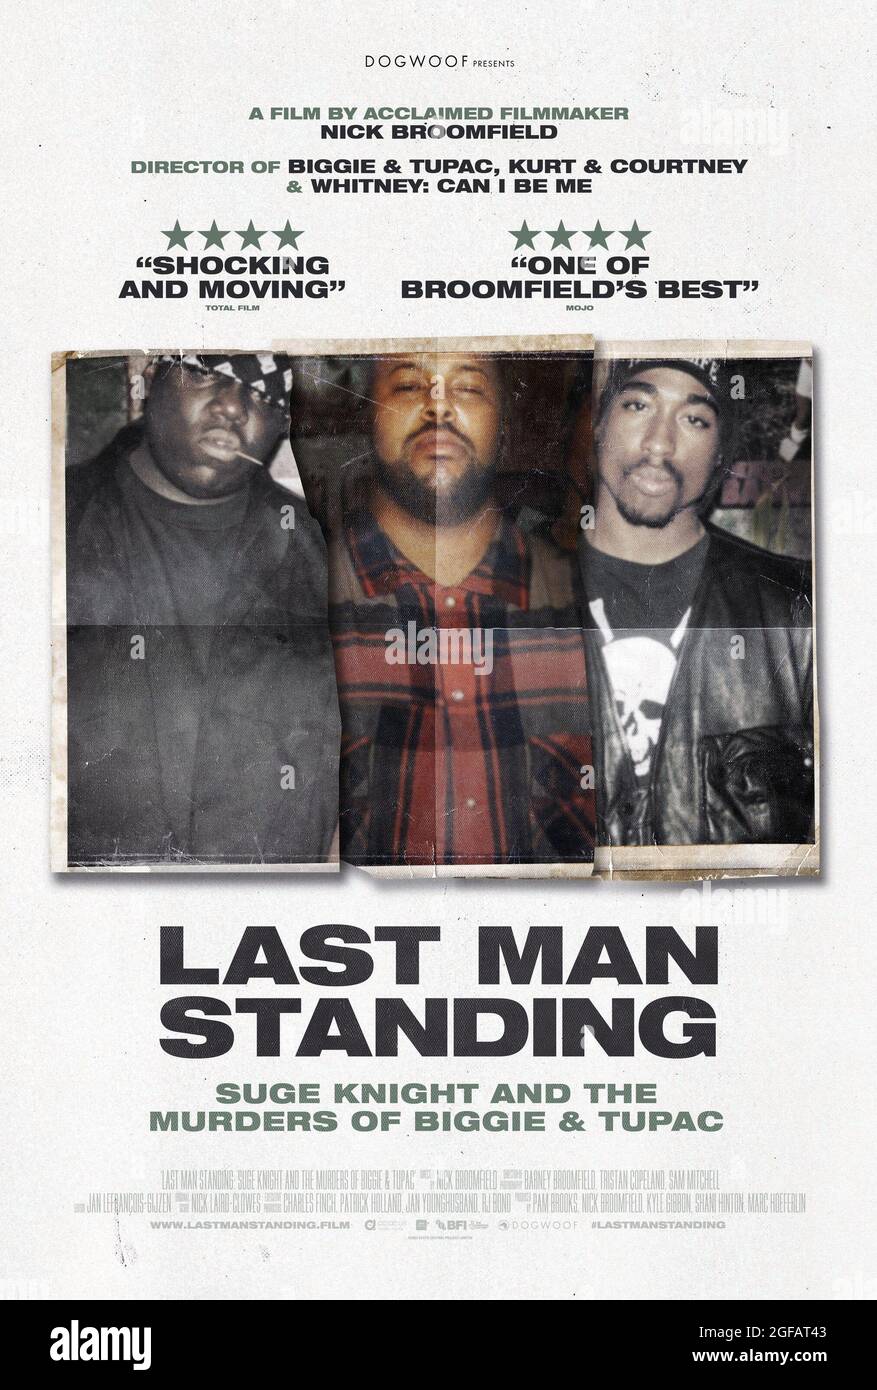 LAST MAN STANDING: SUGE KNIGHT AND THE MURDERS OF BIGGIE & TUPAC